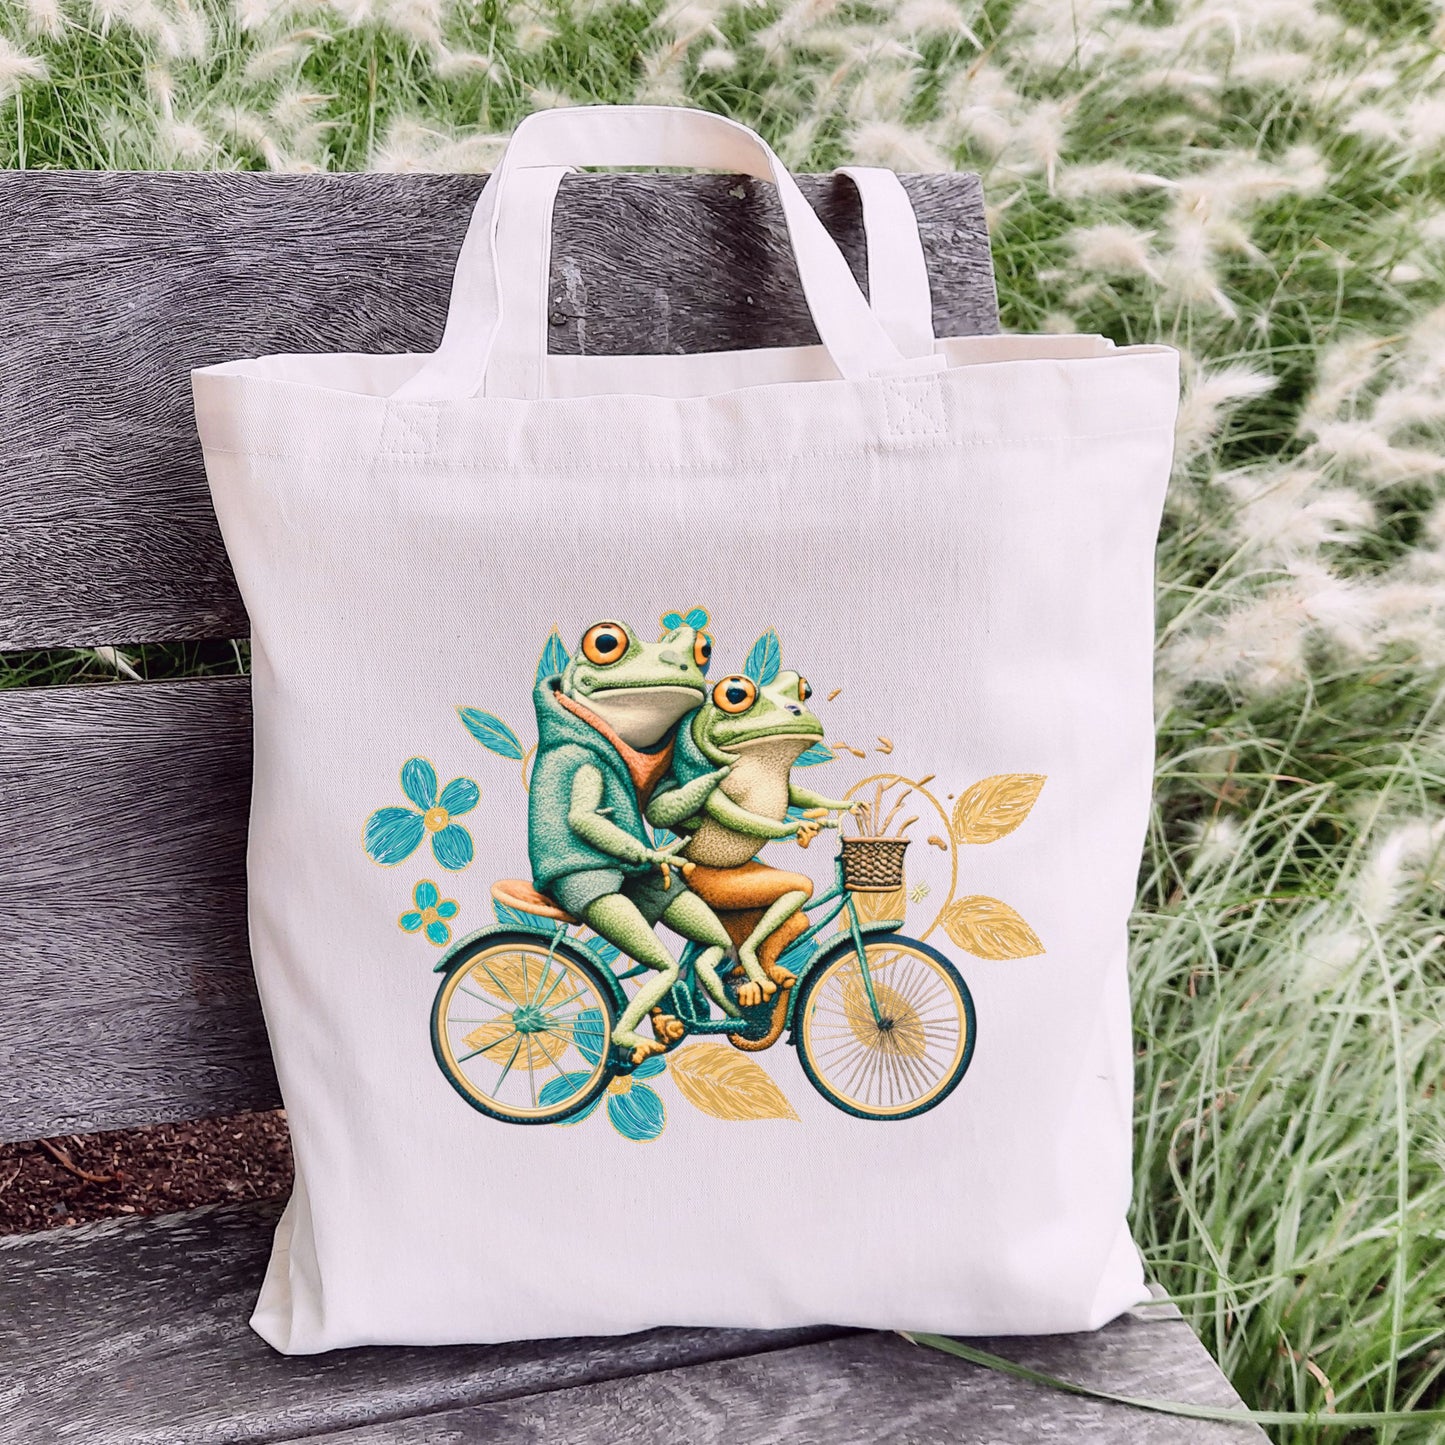 Frogs Reading Tote Bag | Cottagecore Tote Bag | Aesthetic Tote Bag - Vintage Classic Bookworm Tote, a Perfect Gift Bags   